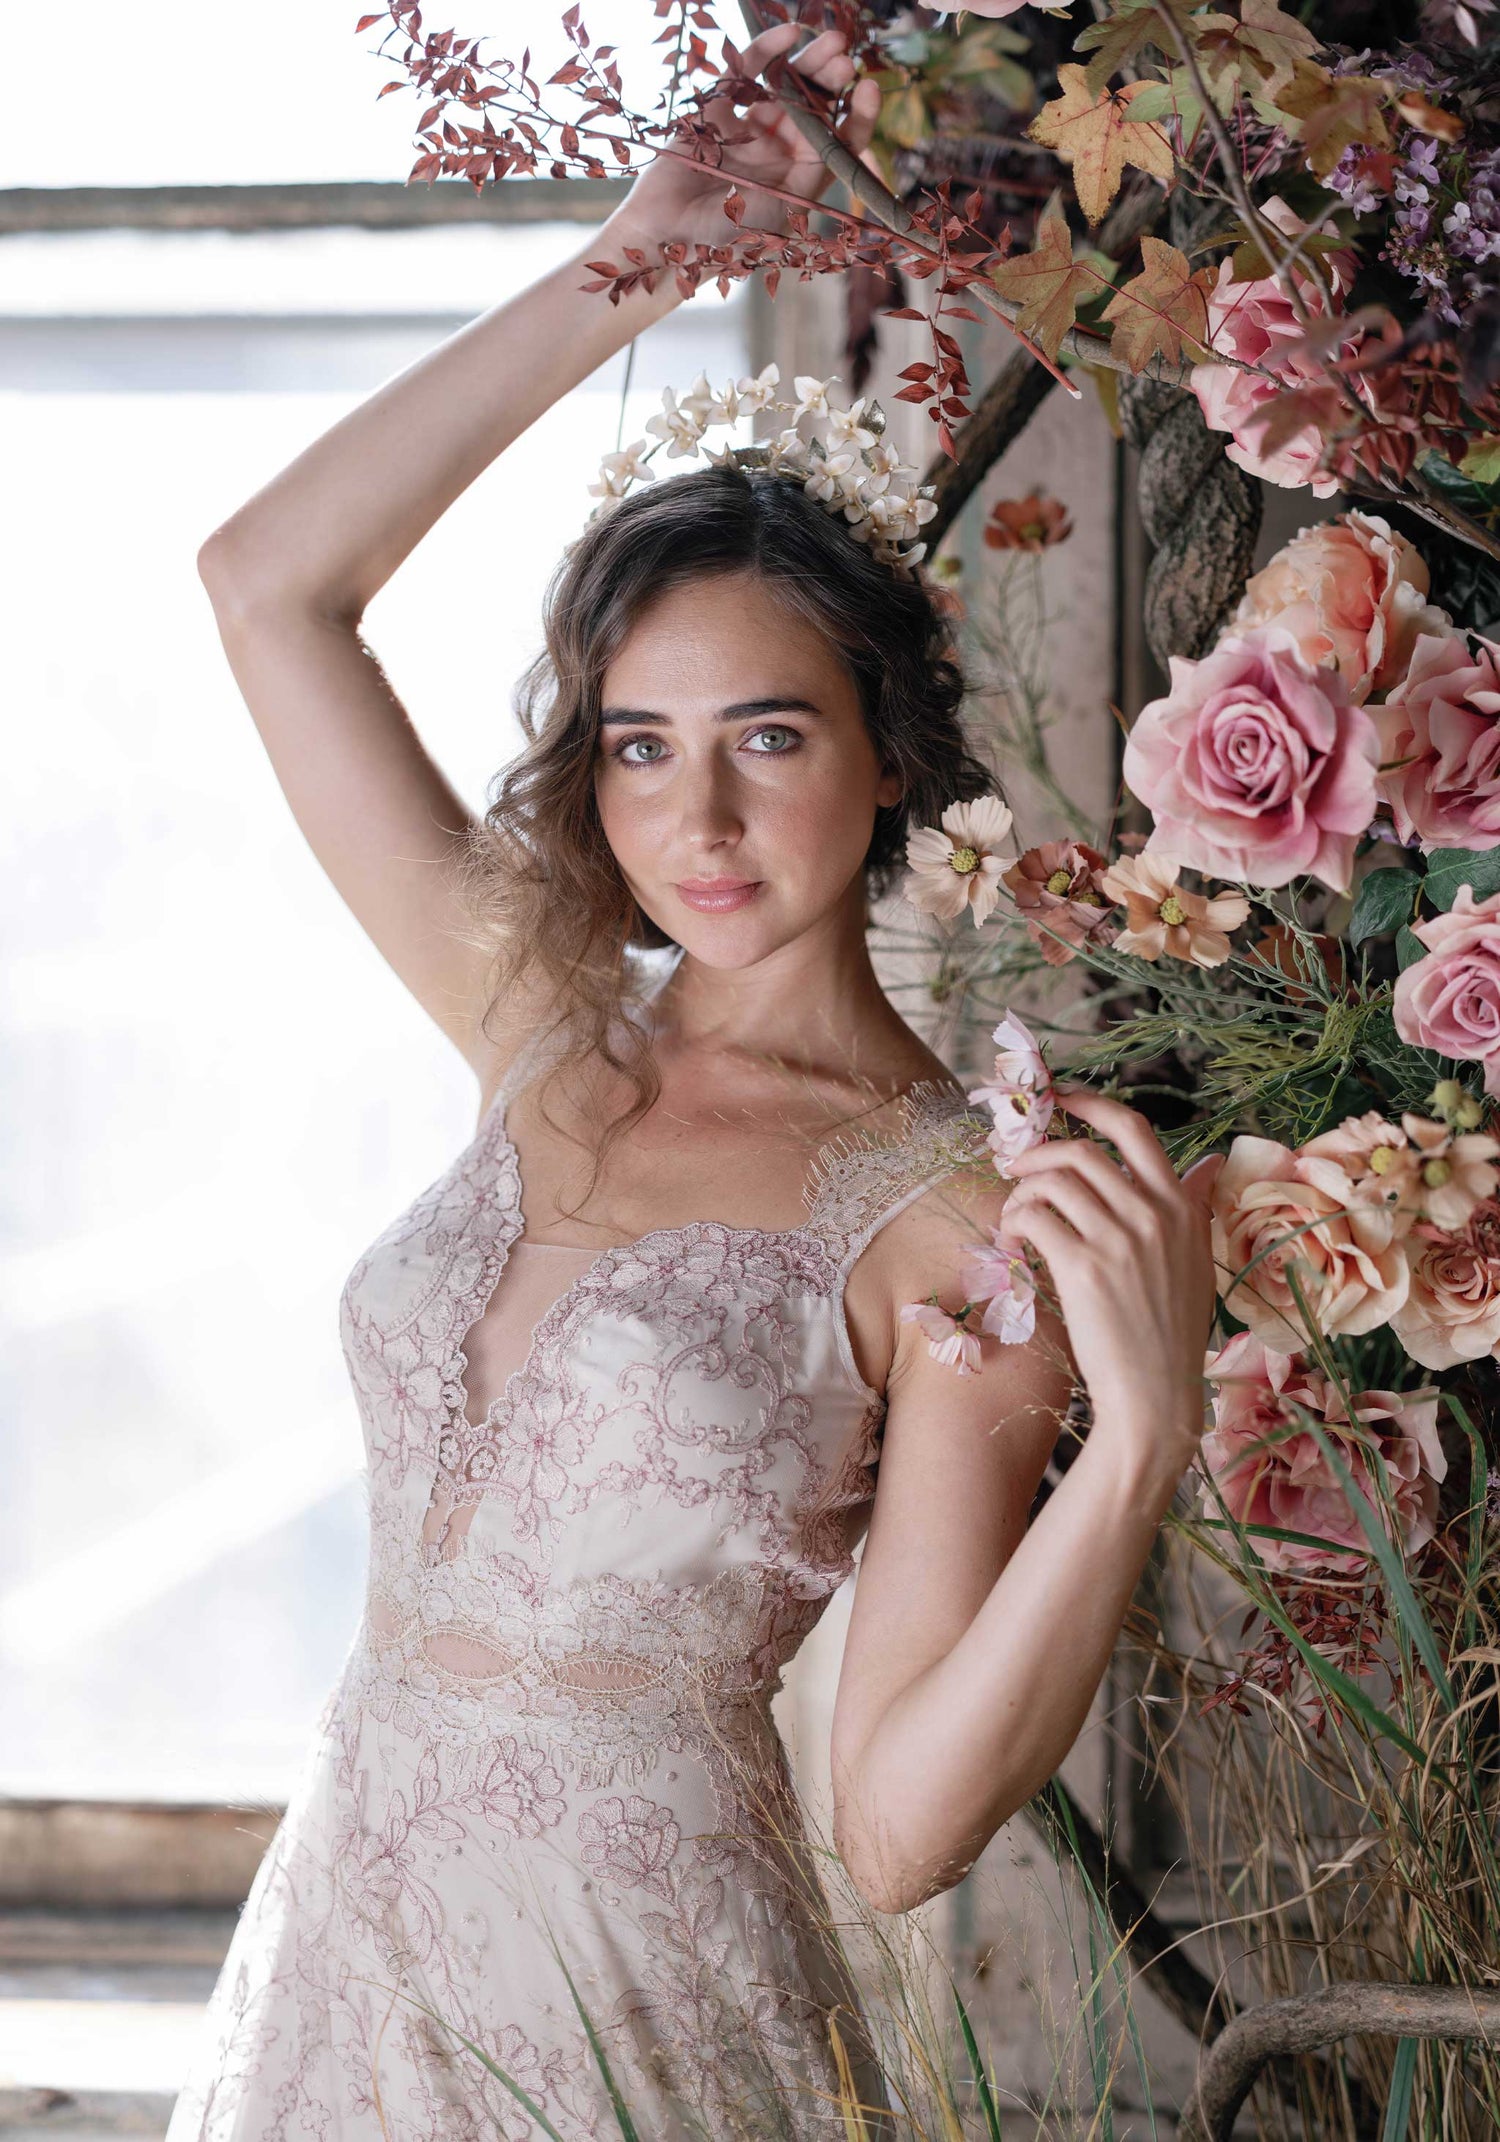 Blush Pink Wedding Dress with Ivory Floral Lace Bodice